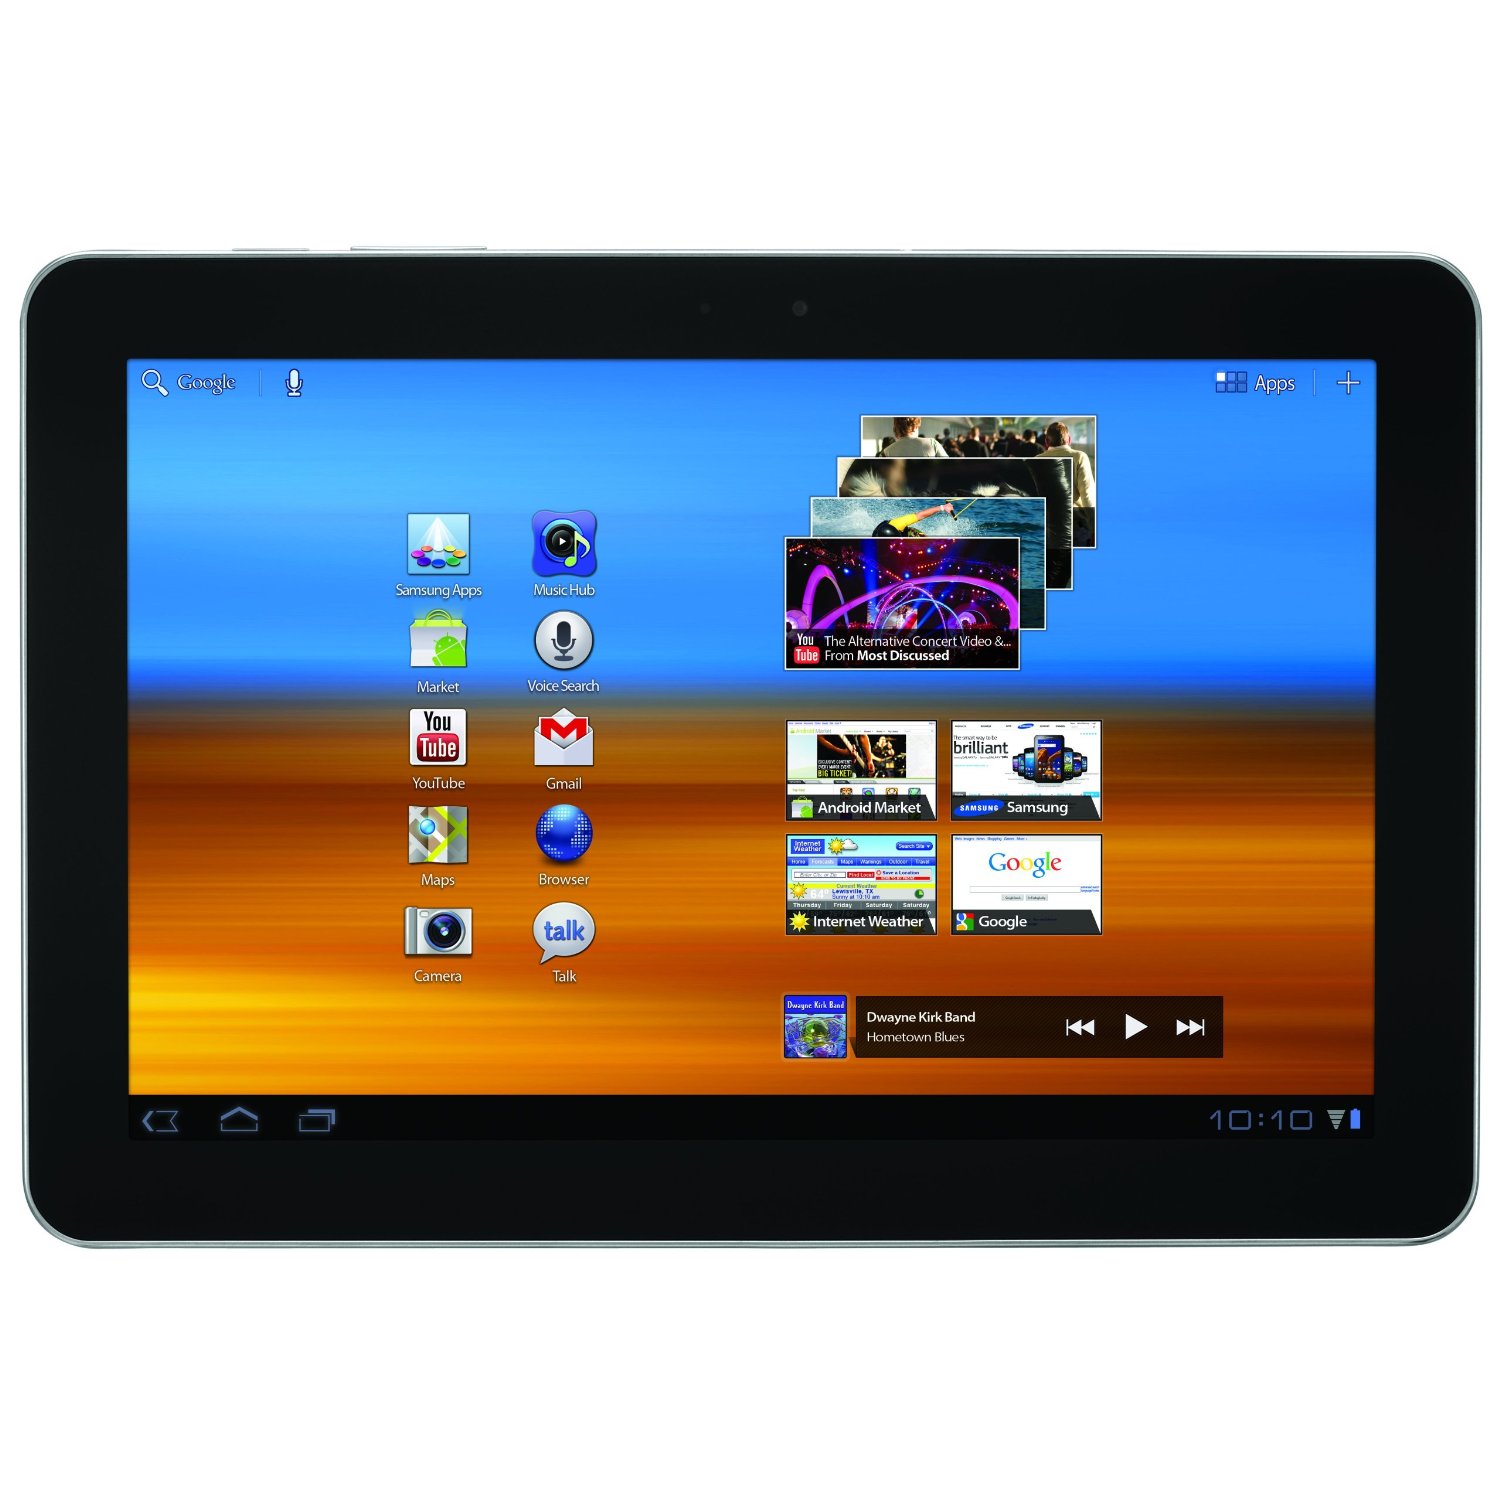 http://thetechjournal.com/wp-content/uploads/images/1108/1313121580-samsung-galaxy-101inch-tablet-with-16gb-wifi-1.jpg